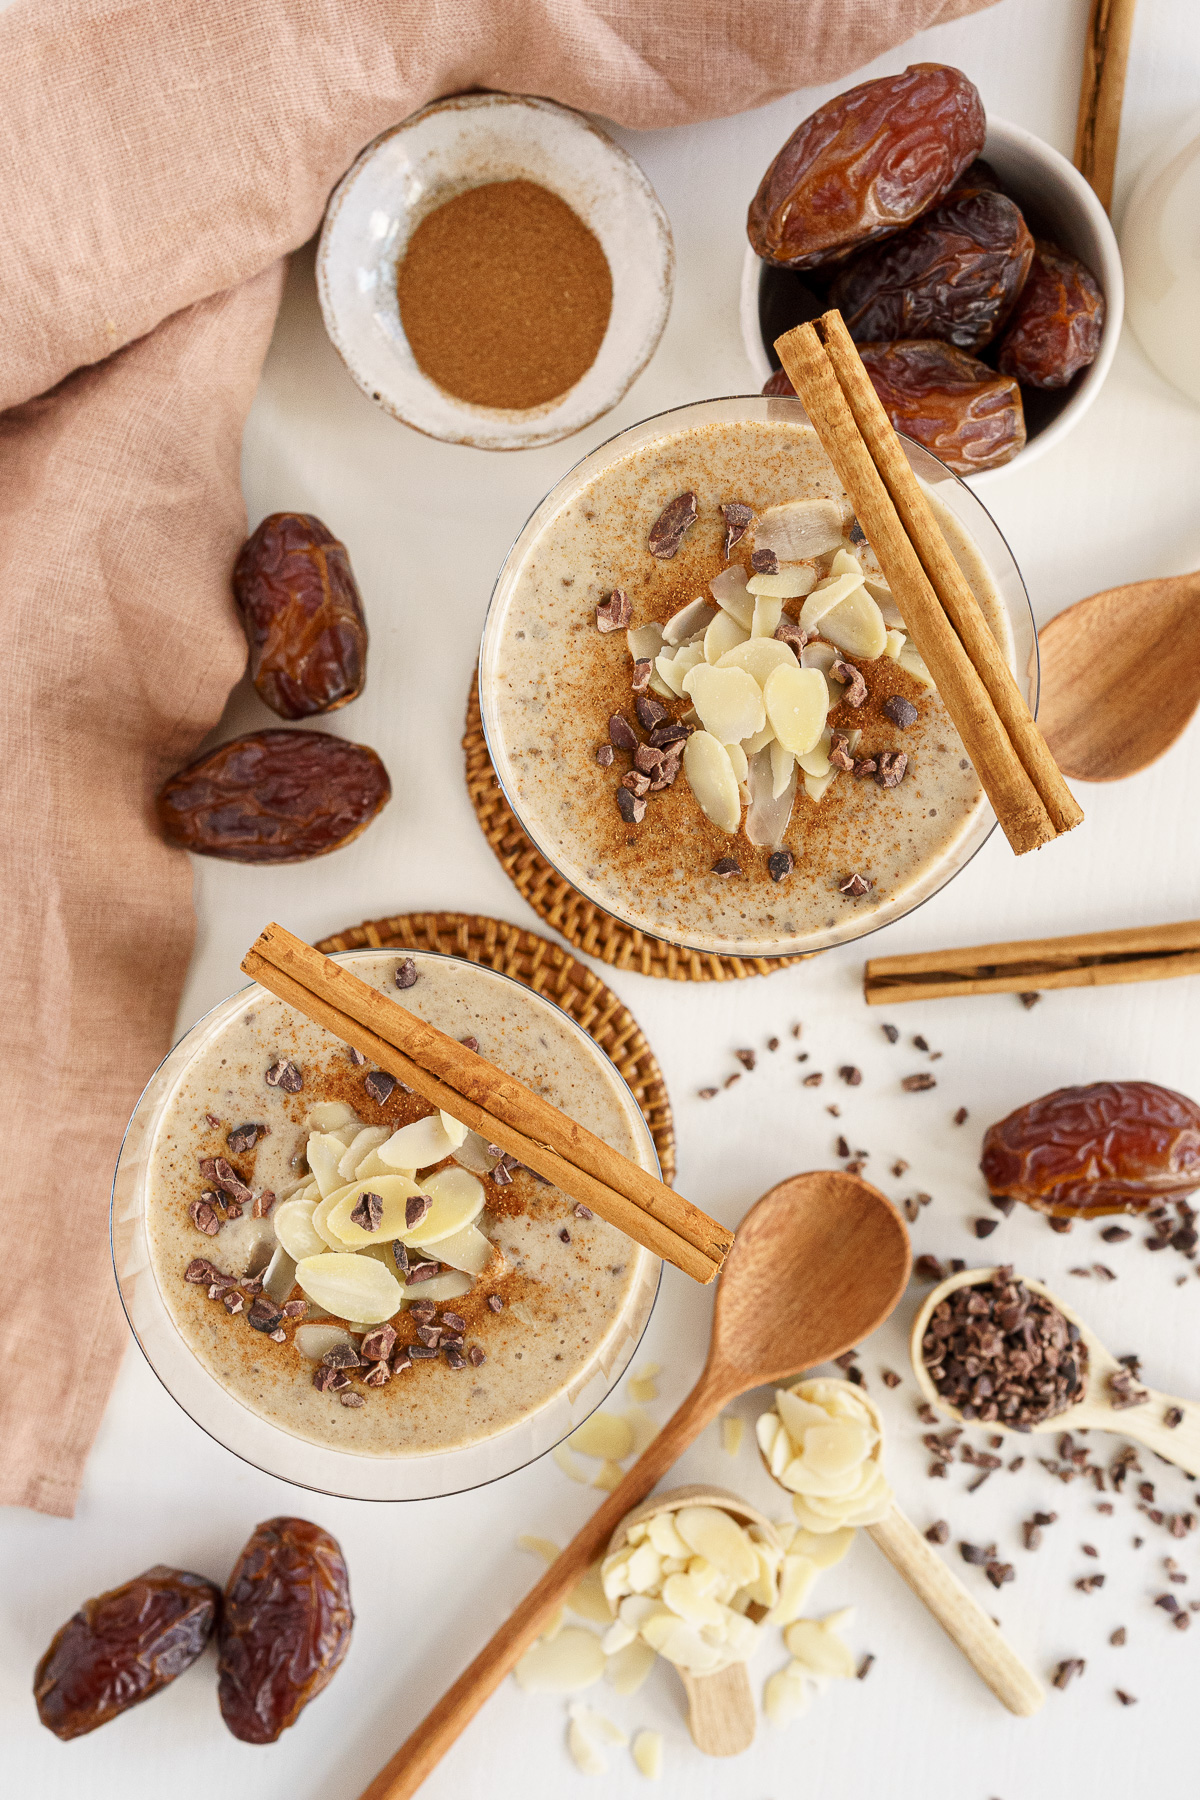 Overhead of date smoothies garnished with cinnamon sticks, almonds and cacao nibs.